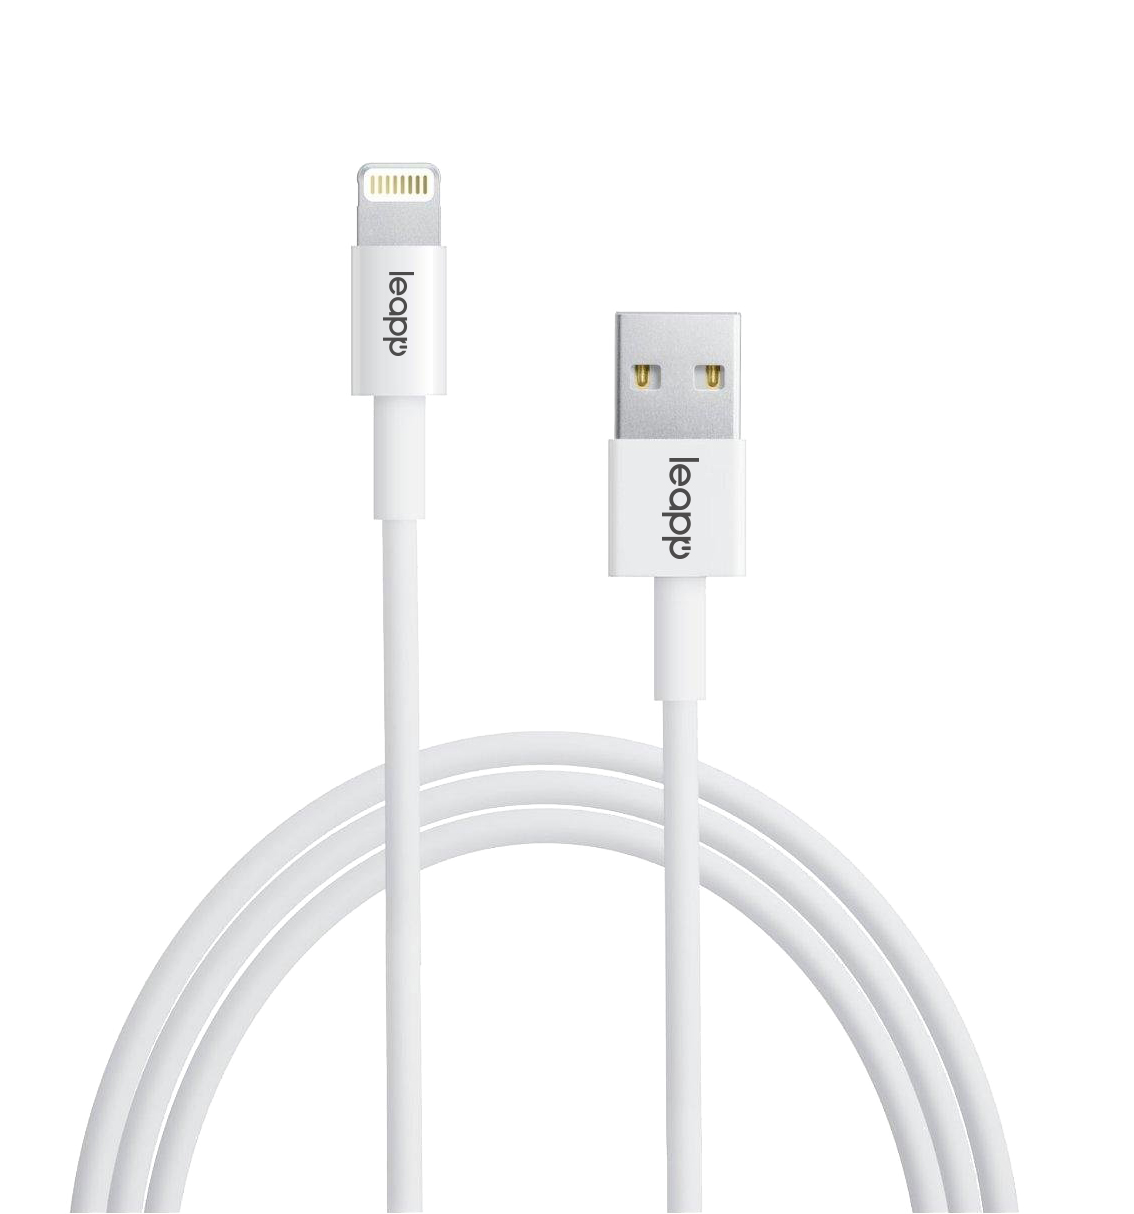 Refurbished leapp Branded Charge + Sync Cable